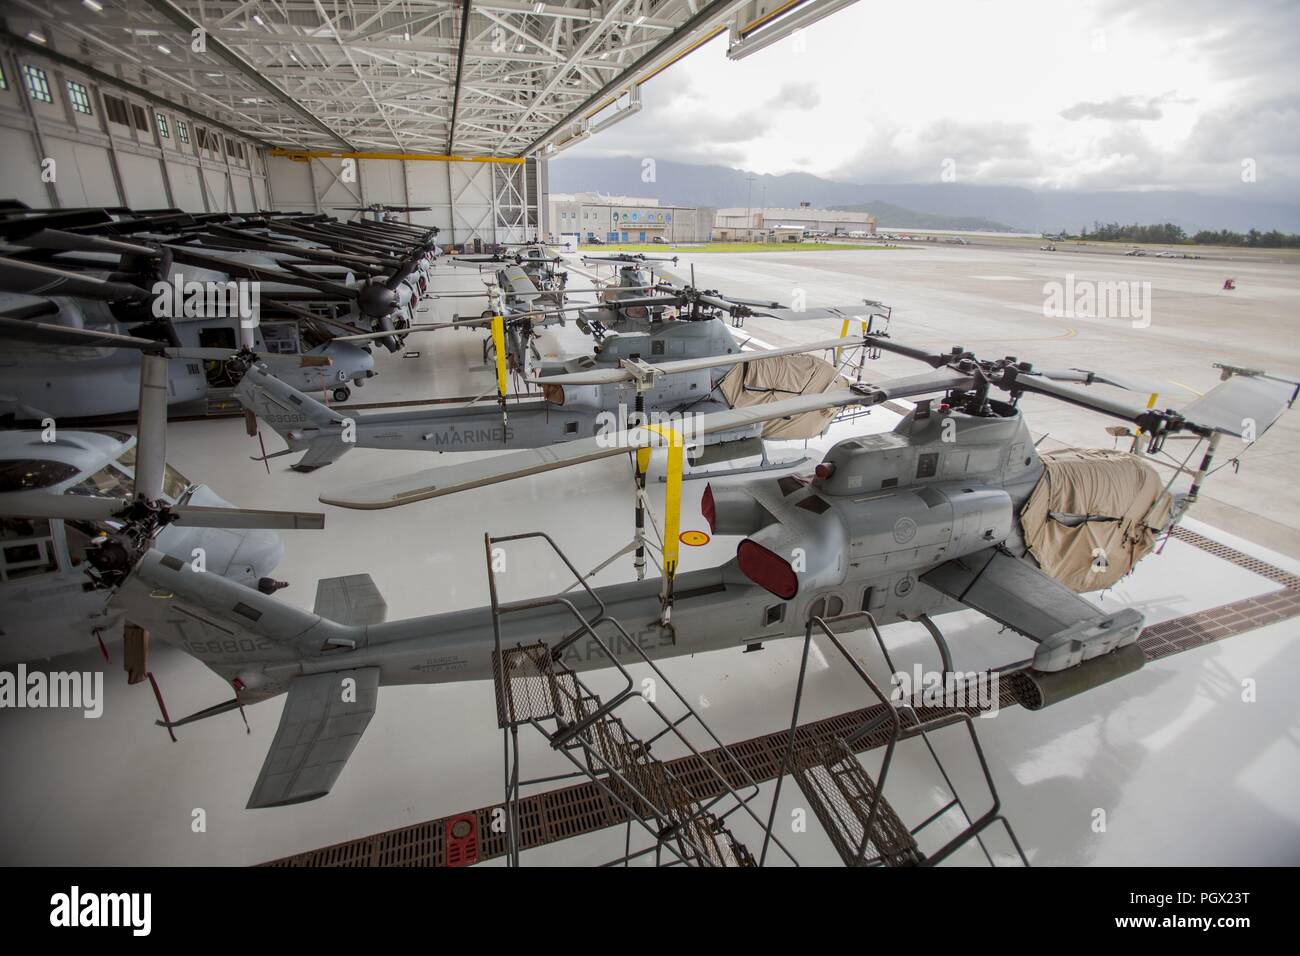 Secured vehicles, aircraft, and equipment prepared for Hurricane Lane's arrival at Marine Corps Air Station (MCAS) Kaneohe Bay, Hawaii, August 22, 2018. Image courtesy Sgt. Jesus Sepulveda Torres / Marine Corps Base Hawaii. () Stock Photo